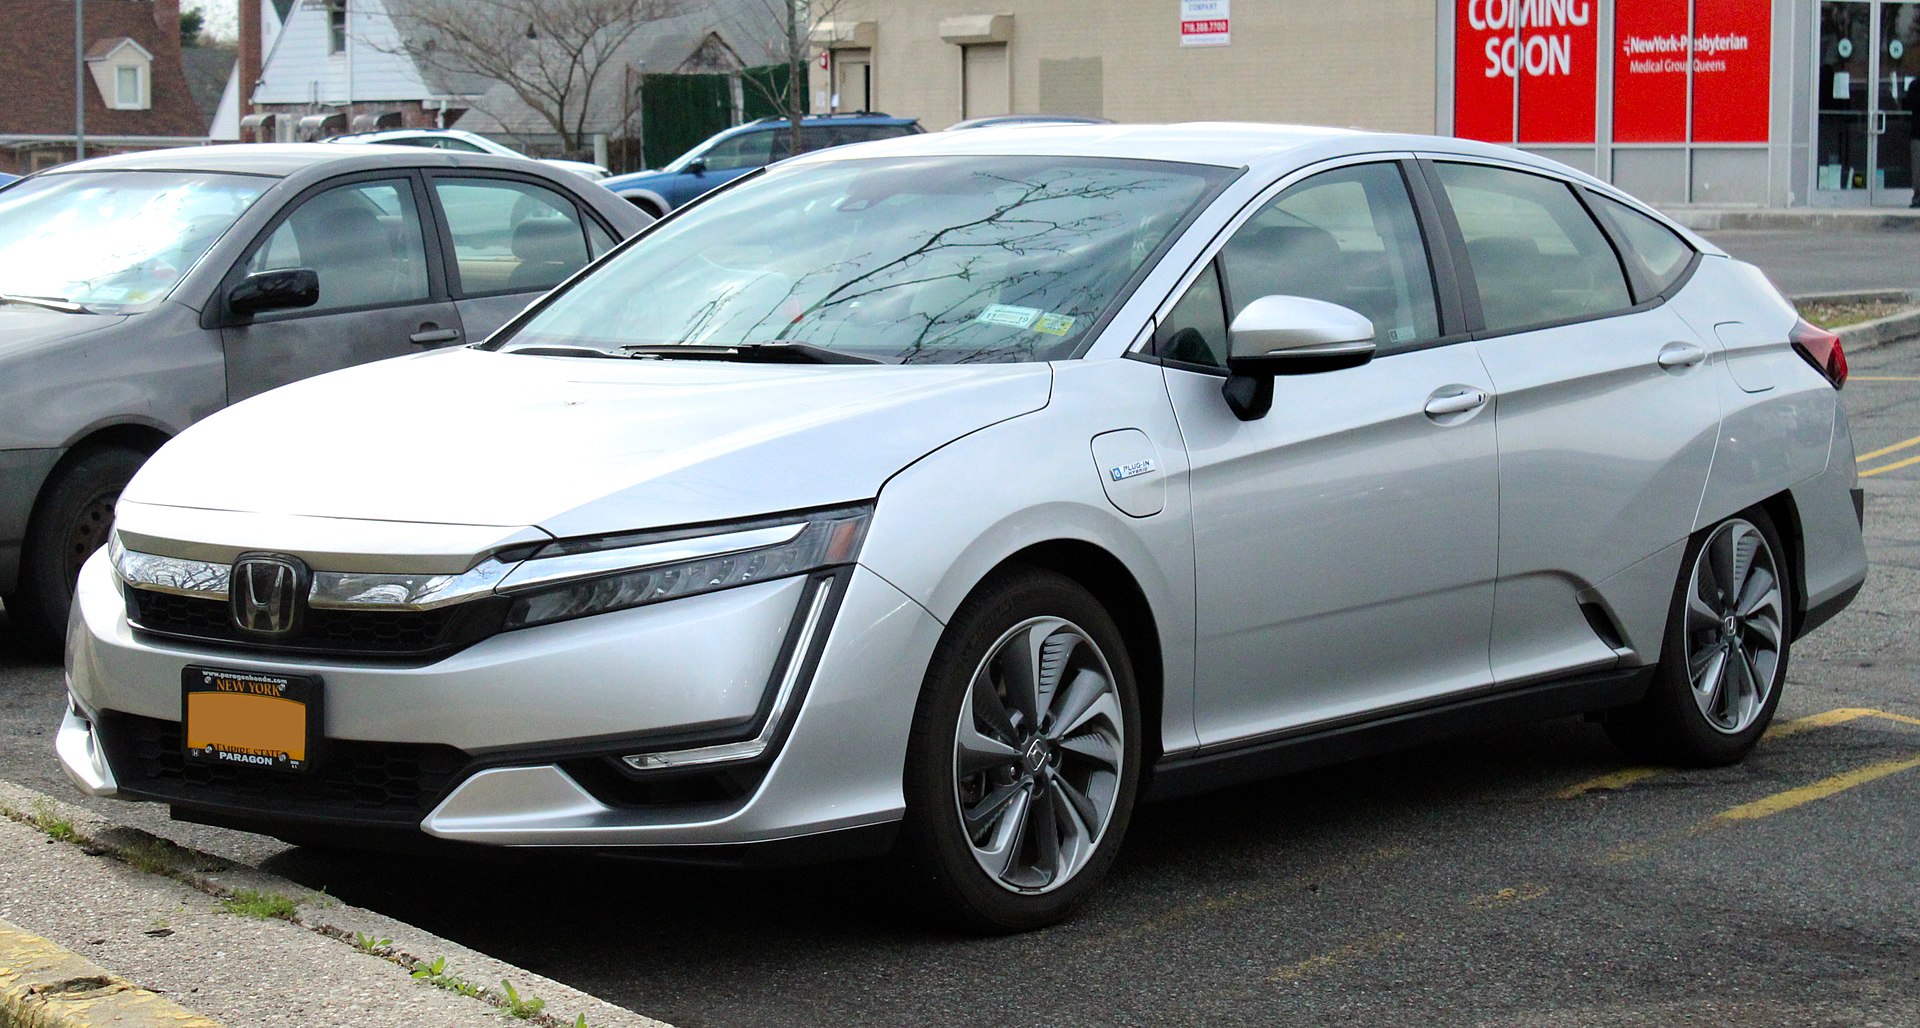 Honda Clarity Plug-In Hybrid Battery Replacement, Specifications